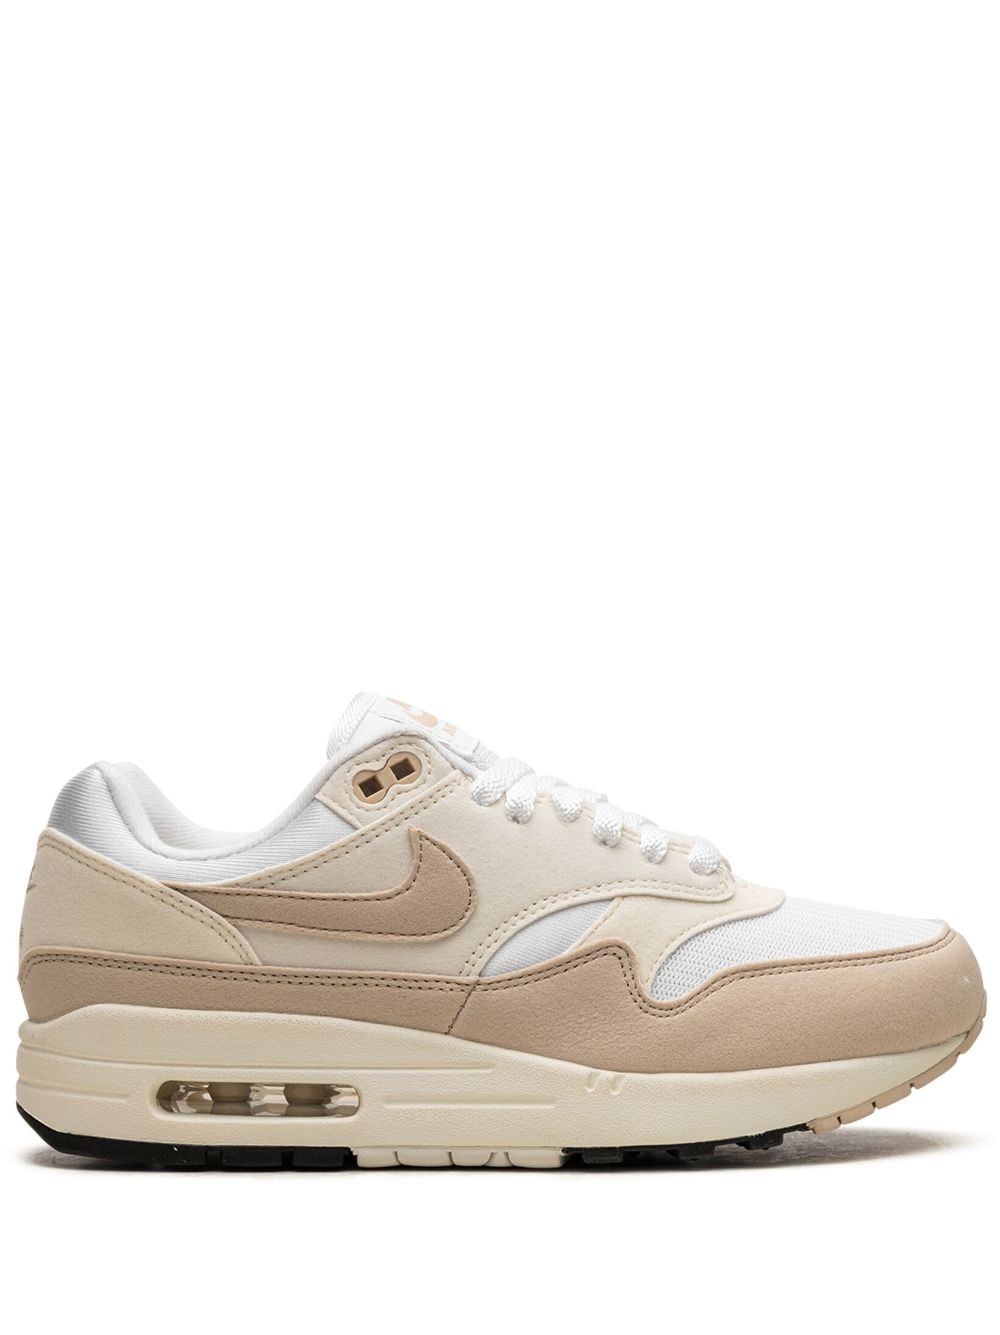 Nike Womens Pale Ivory Sandrift Whit Air Max 1 Leather Low-top Trainers In Nude (lingerie)